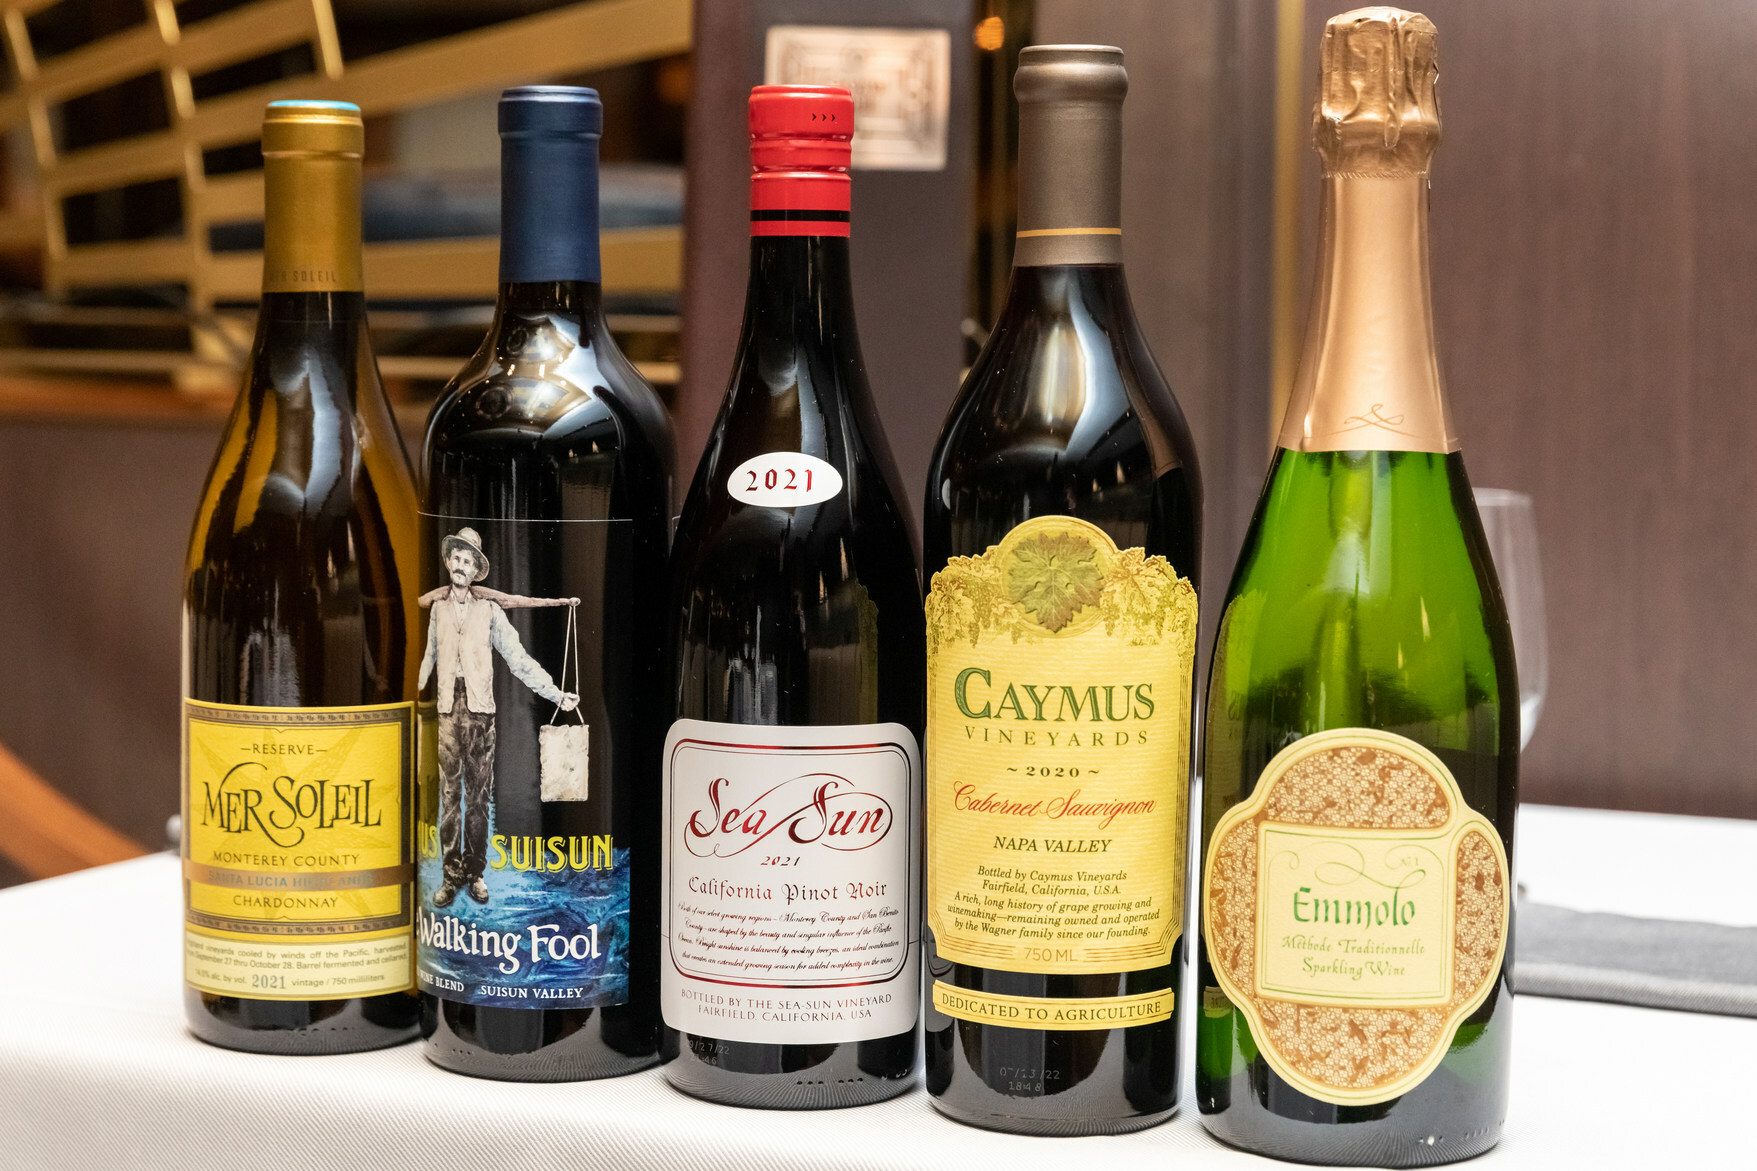 Princess Cruises Announces New Winemaker Dinner with Caymus Vineyards (Image at LateCruiseNews.com - March 2023)